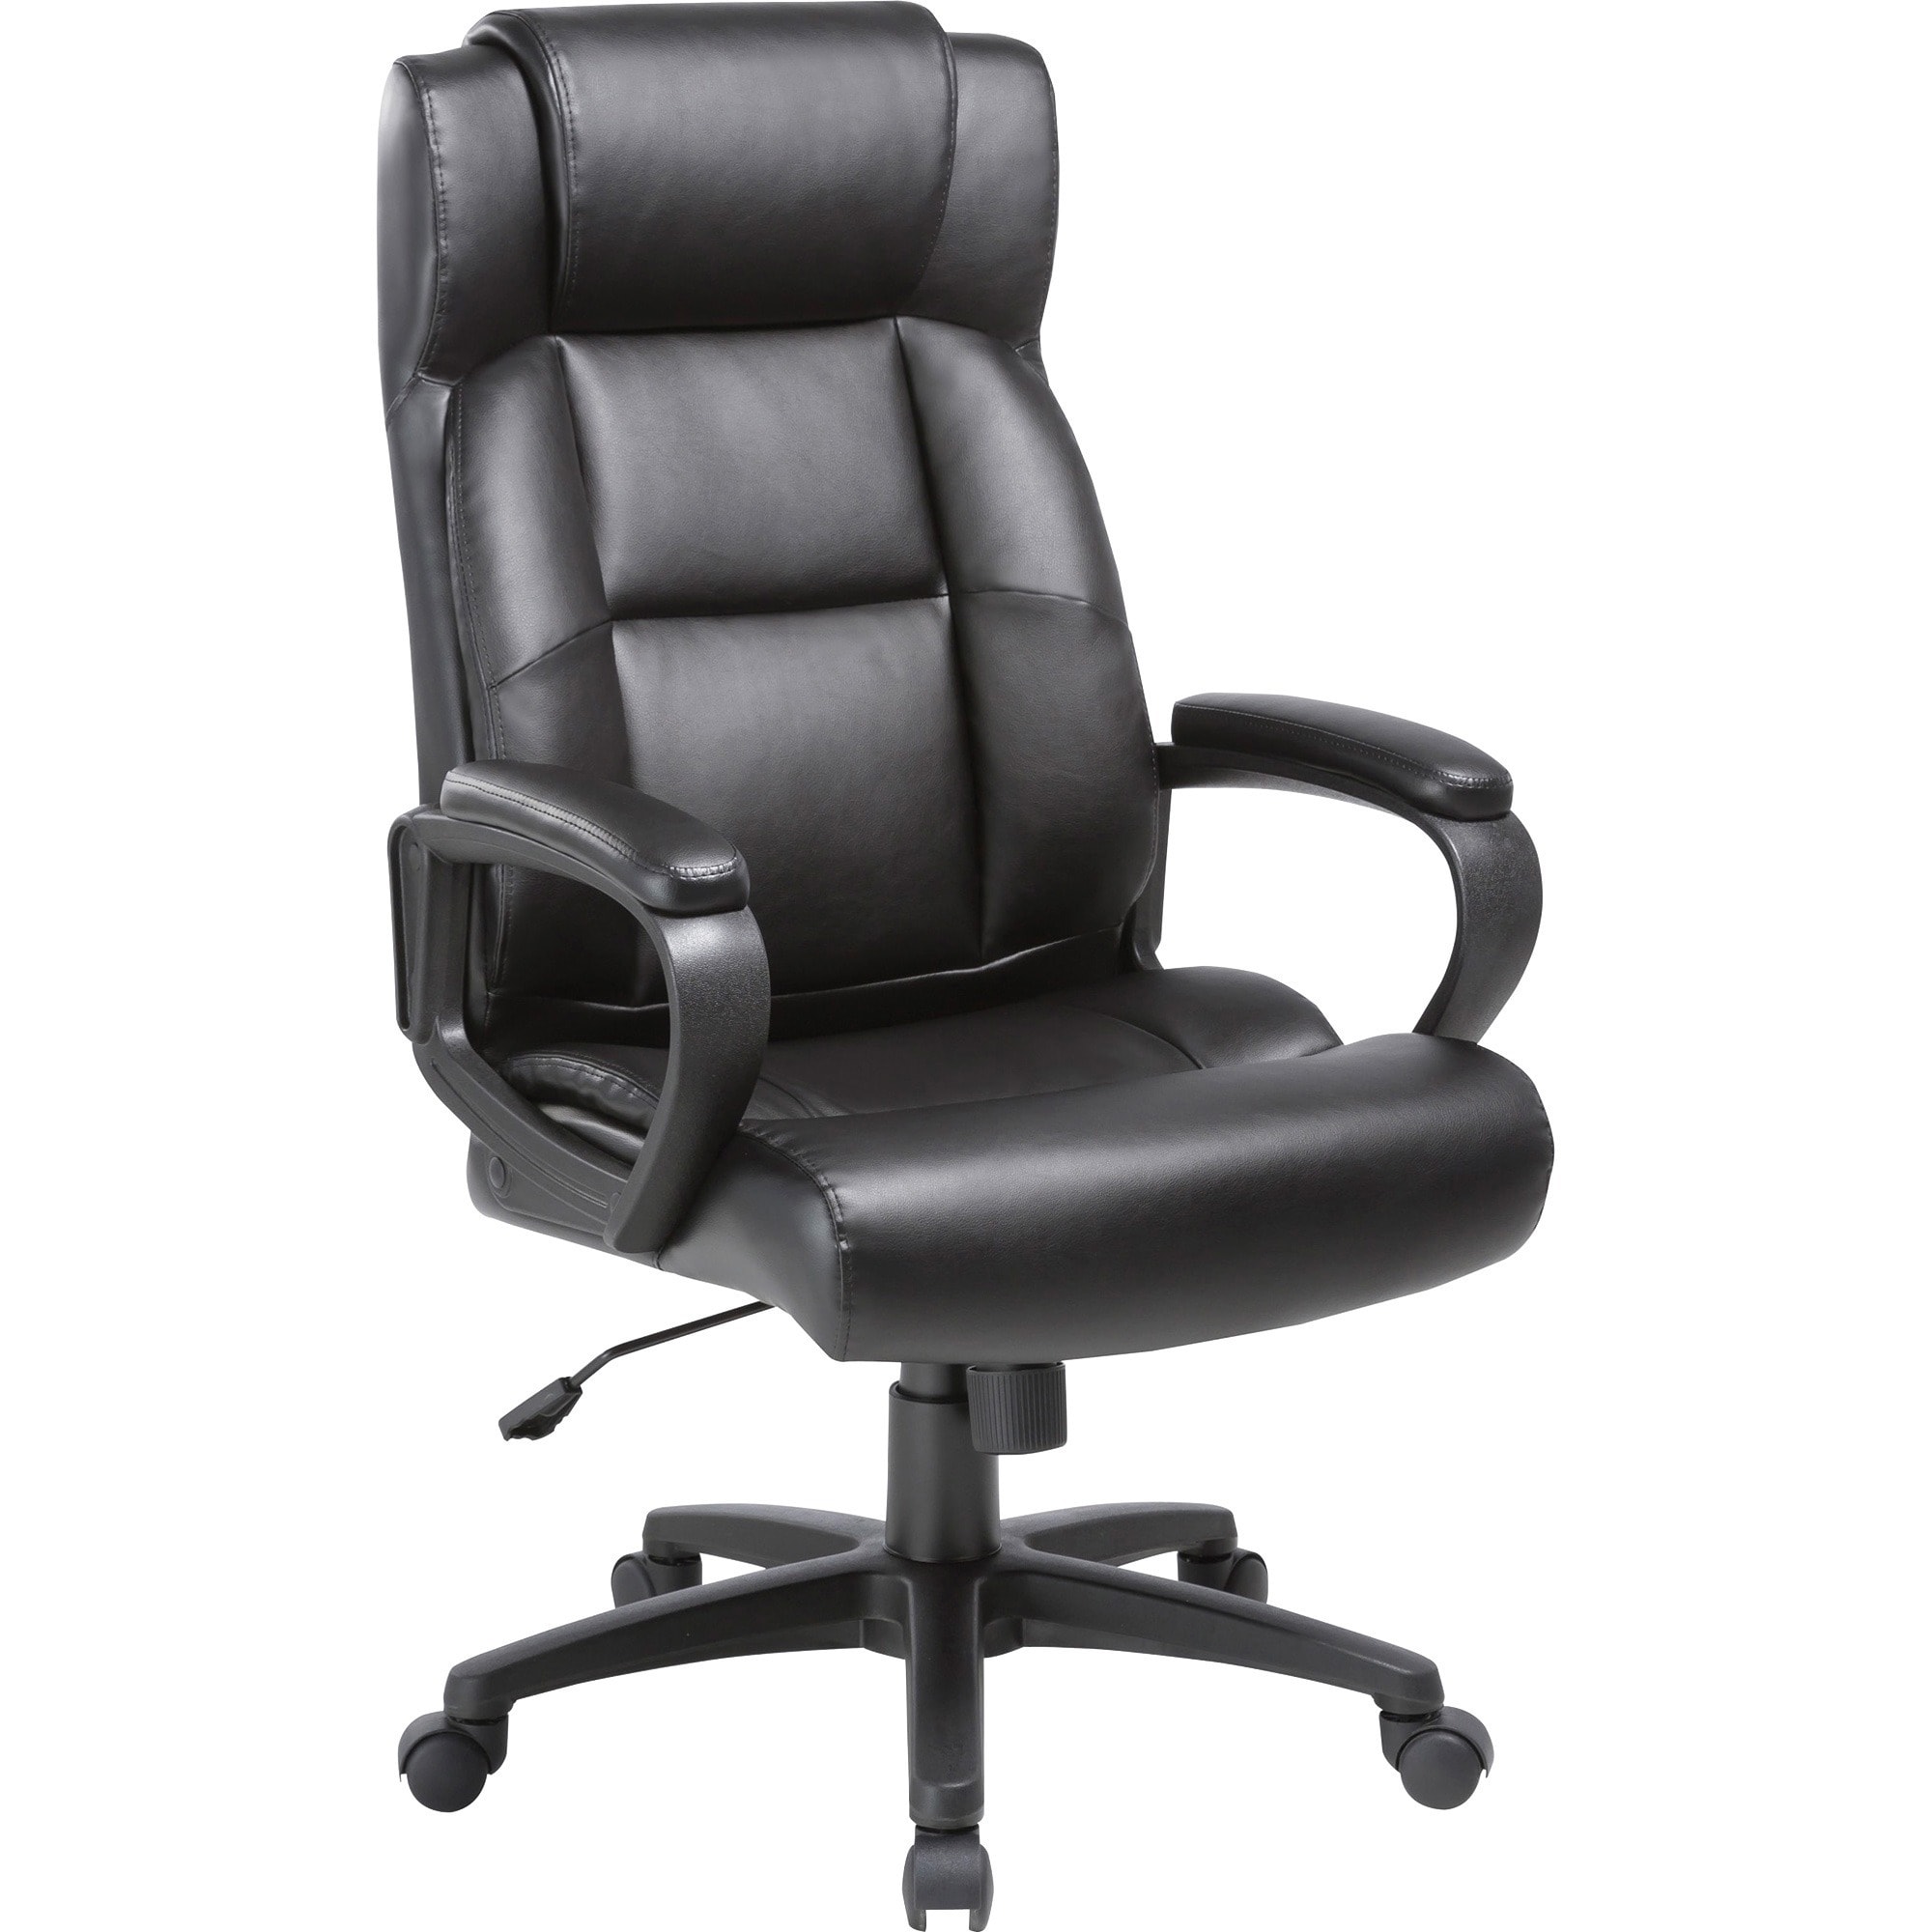 https://ak1.ostkcdn.com/images/products/is/images/direct/338f22f1a652ee451a0e0ec18c89d0a1d46ac8ac/Lorell-Soho-High-back-Leather-Executive-Chair---Black-Bonded-Leather-Seat---Black-Bonded-Leather-Back---5-star-Base---1-Each.jpg